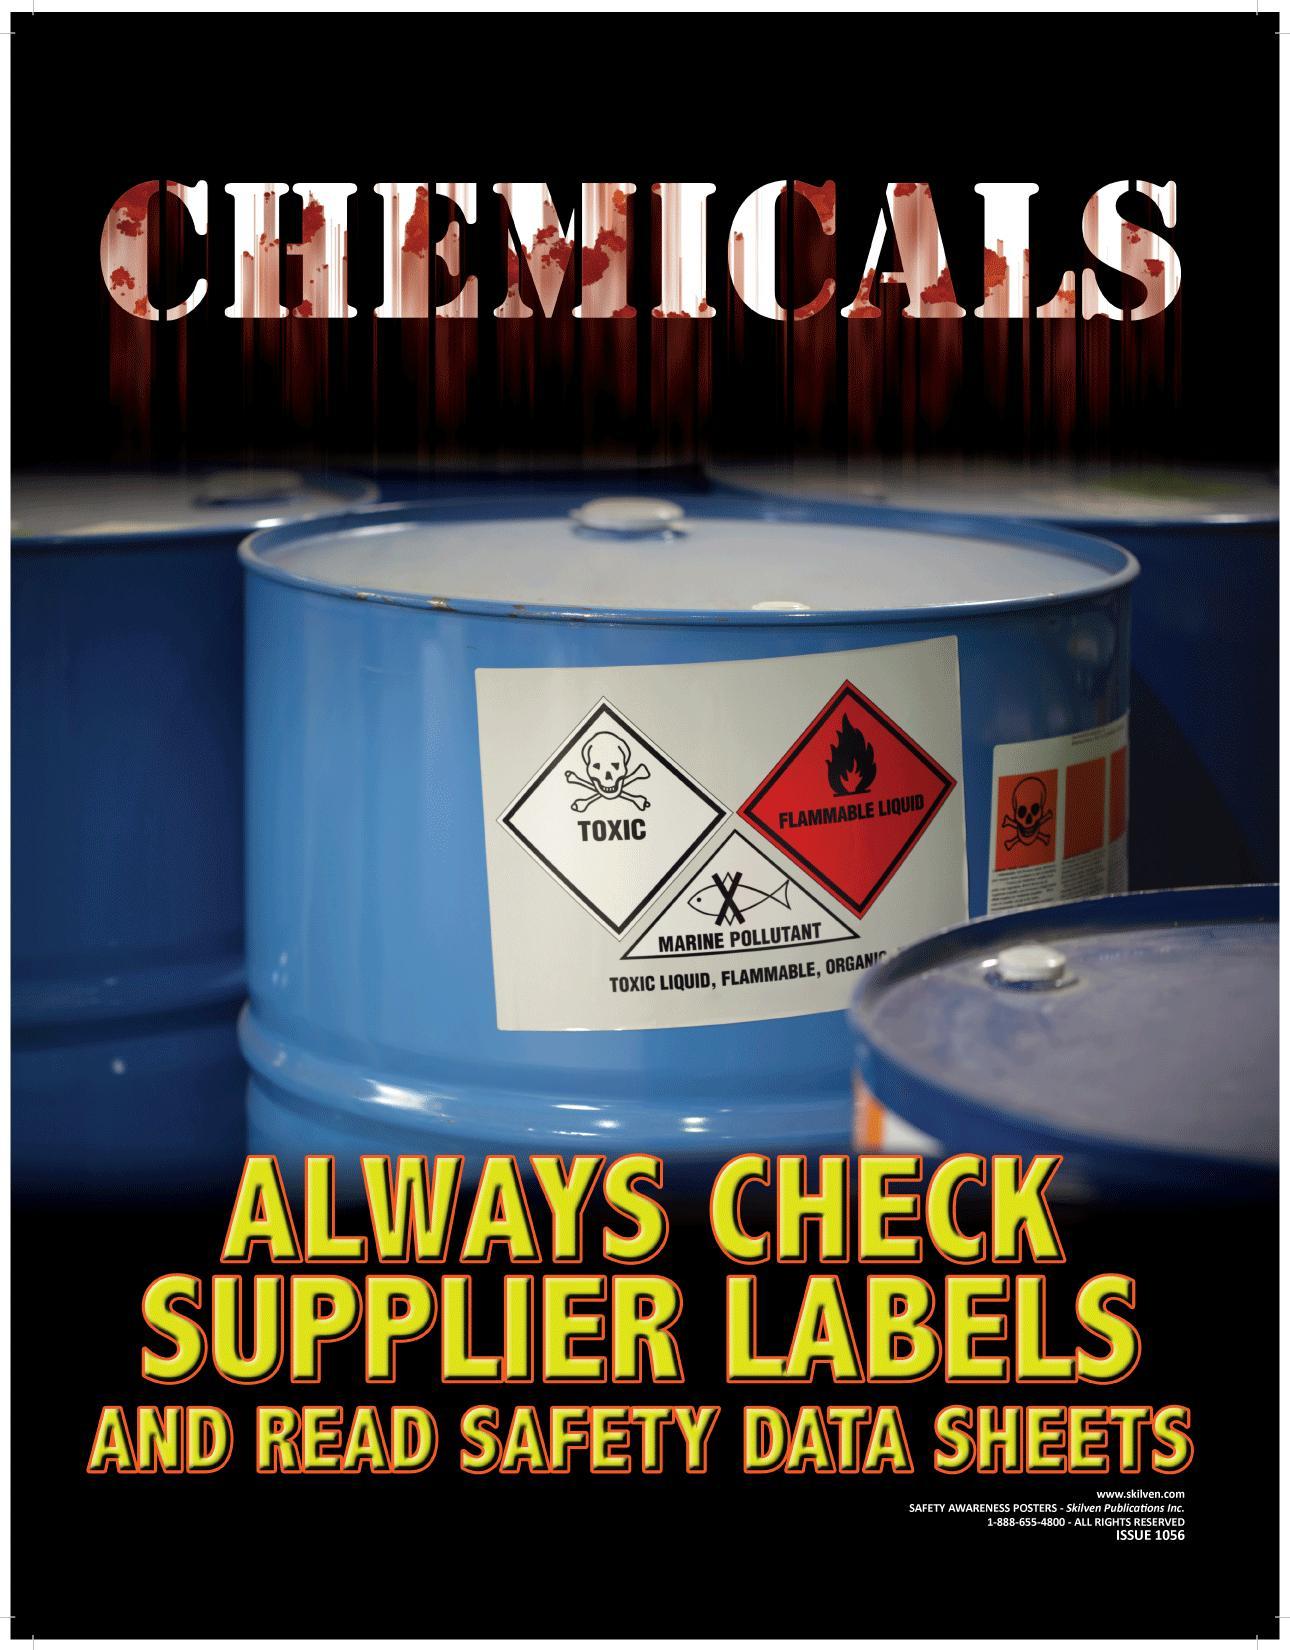 image reminding people to check chemical labels and the safety data sheet before using